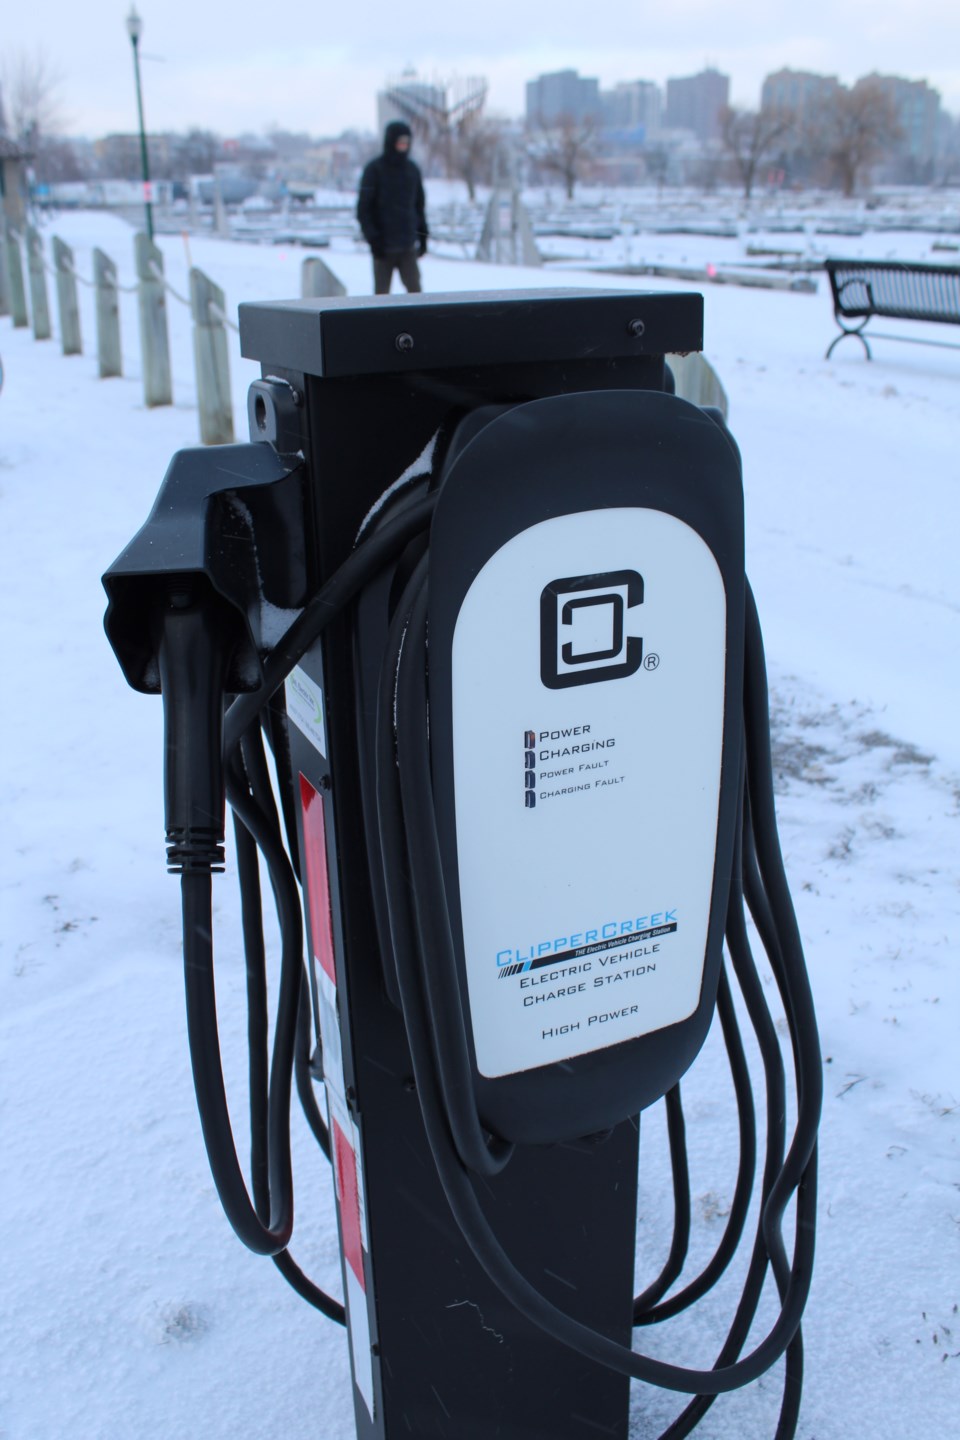 2020-01-08 Electric vehicle charger RB 1